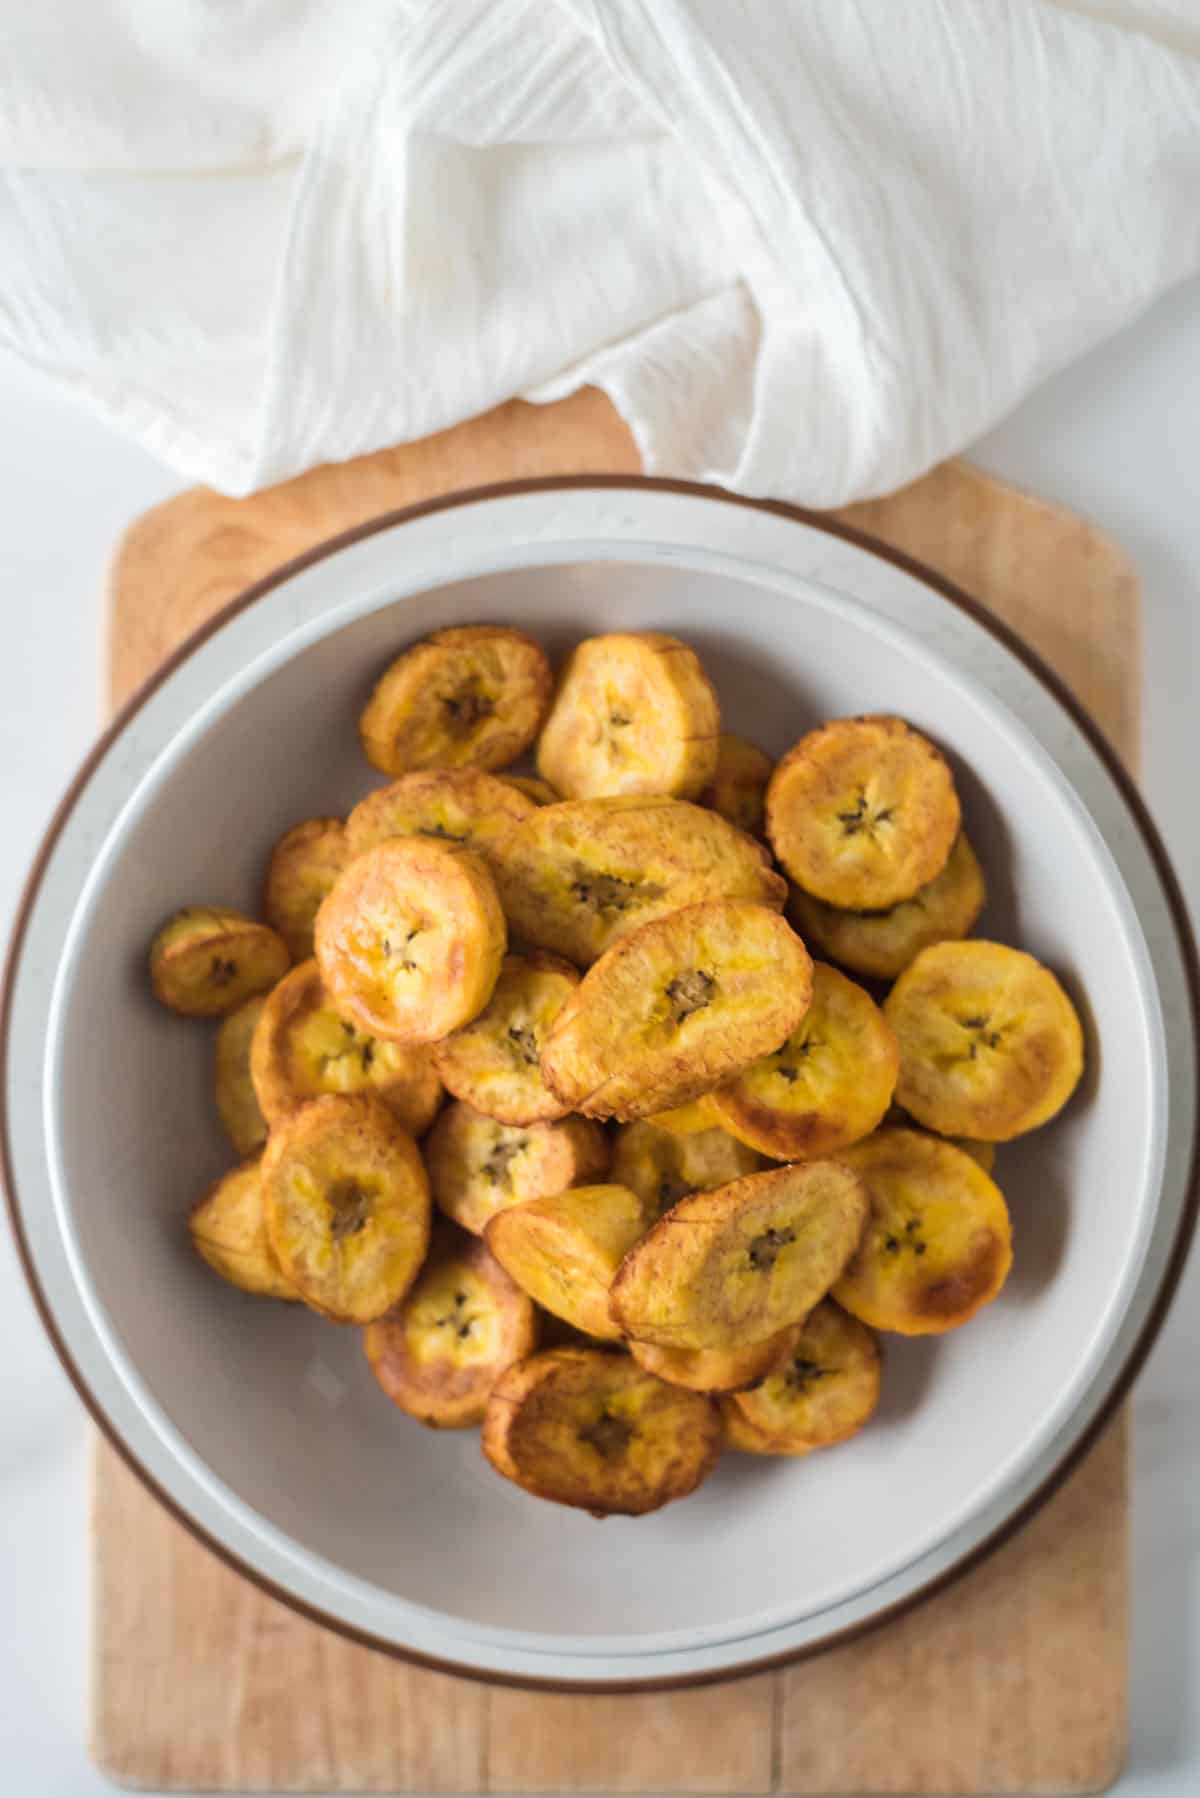 white bowl filled with fried plantain slices